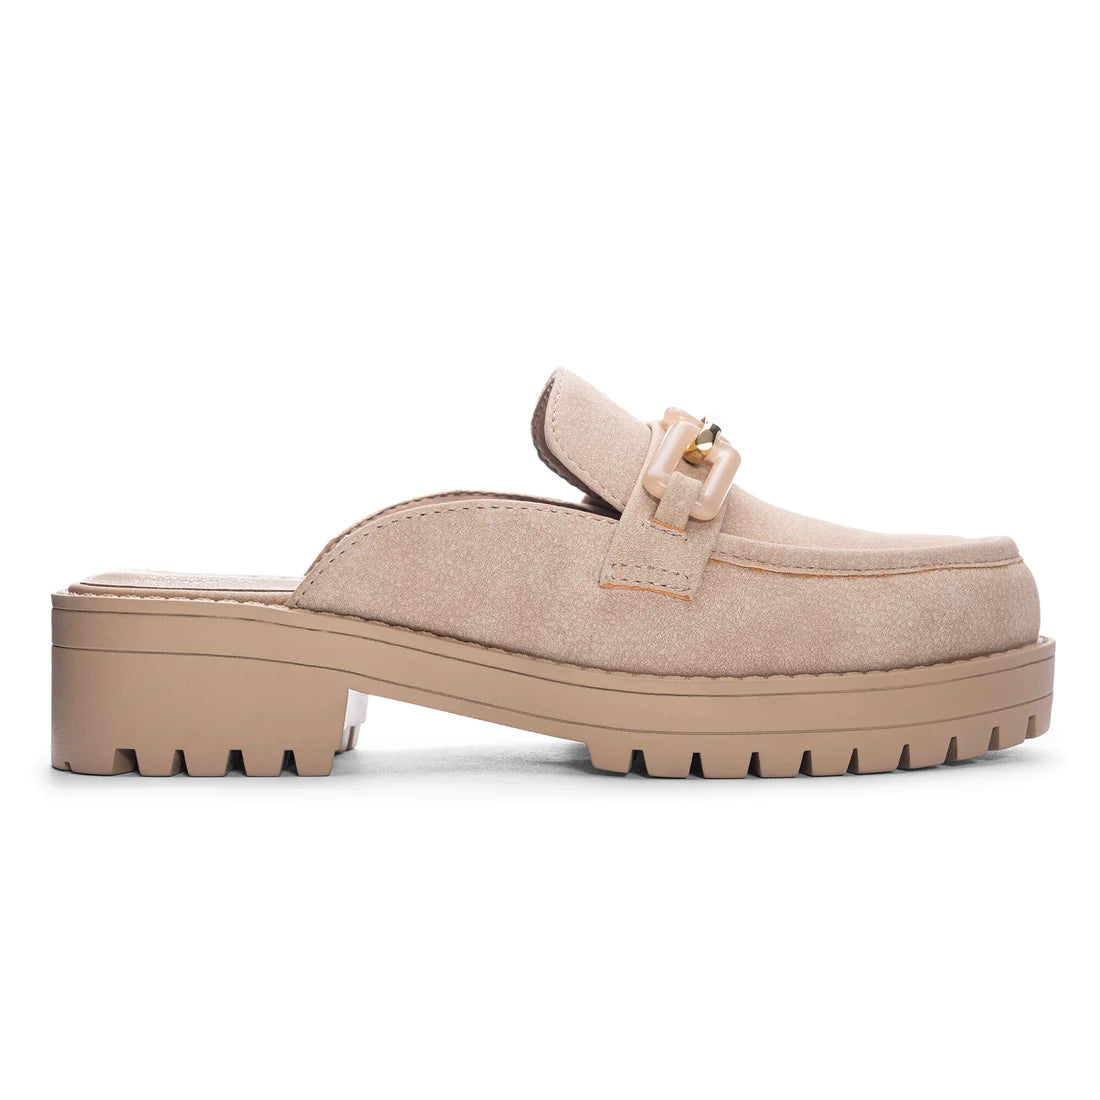 Valor Backless Loafer by Chinese Laundry